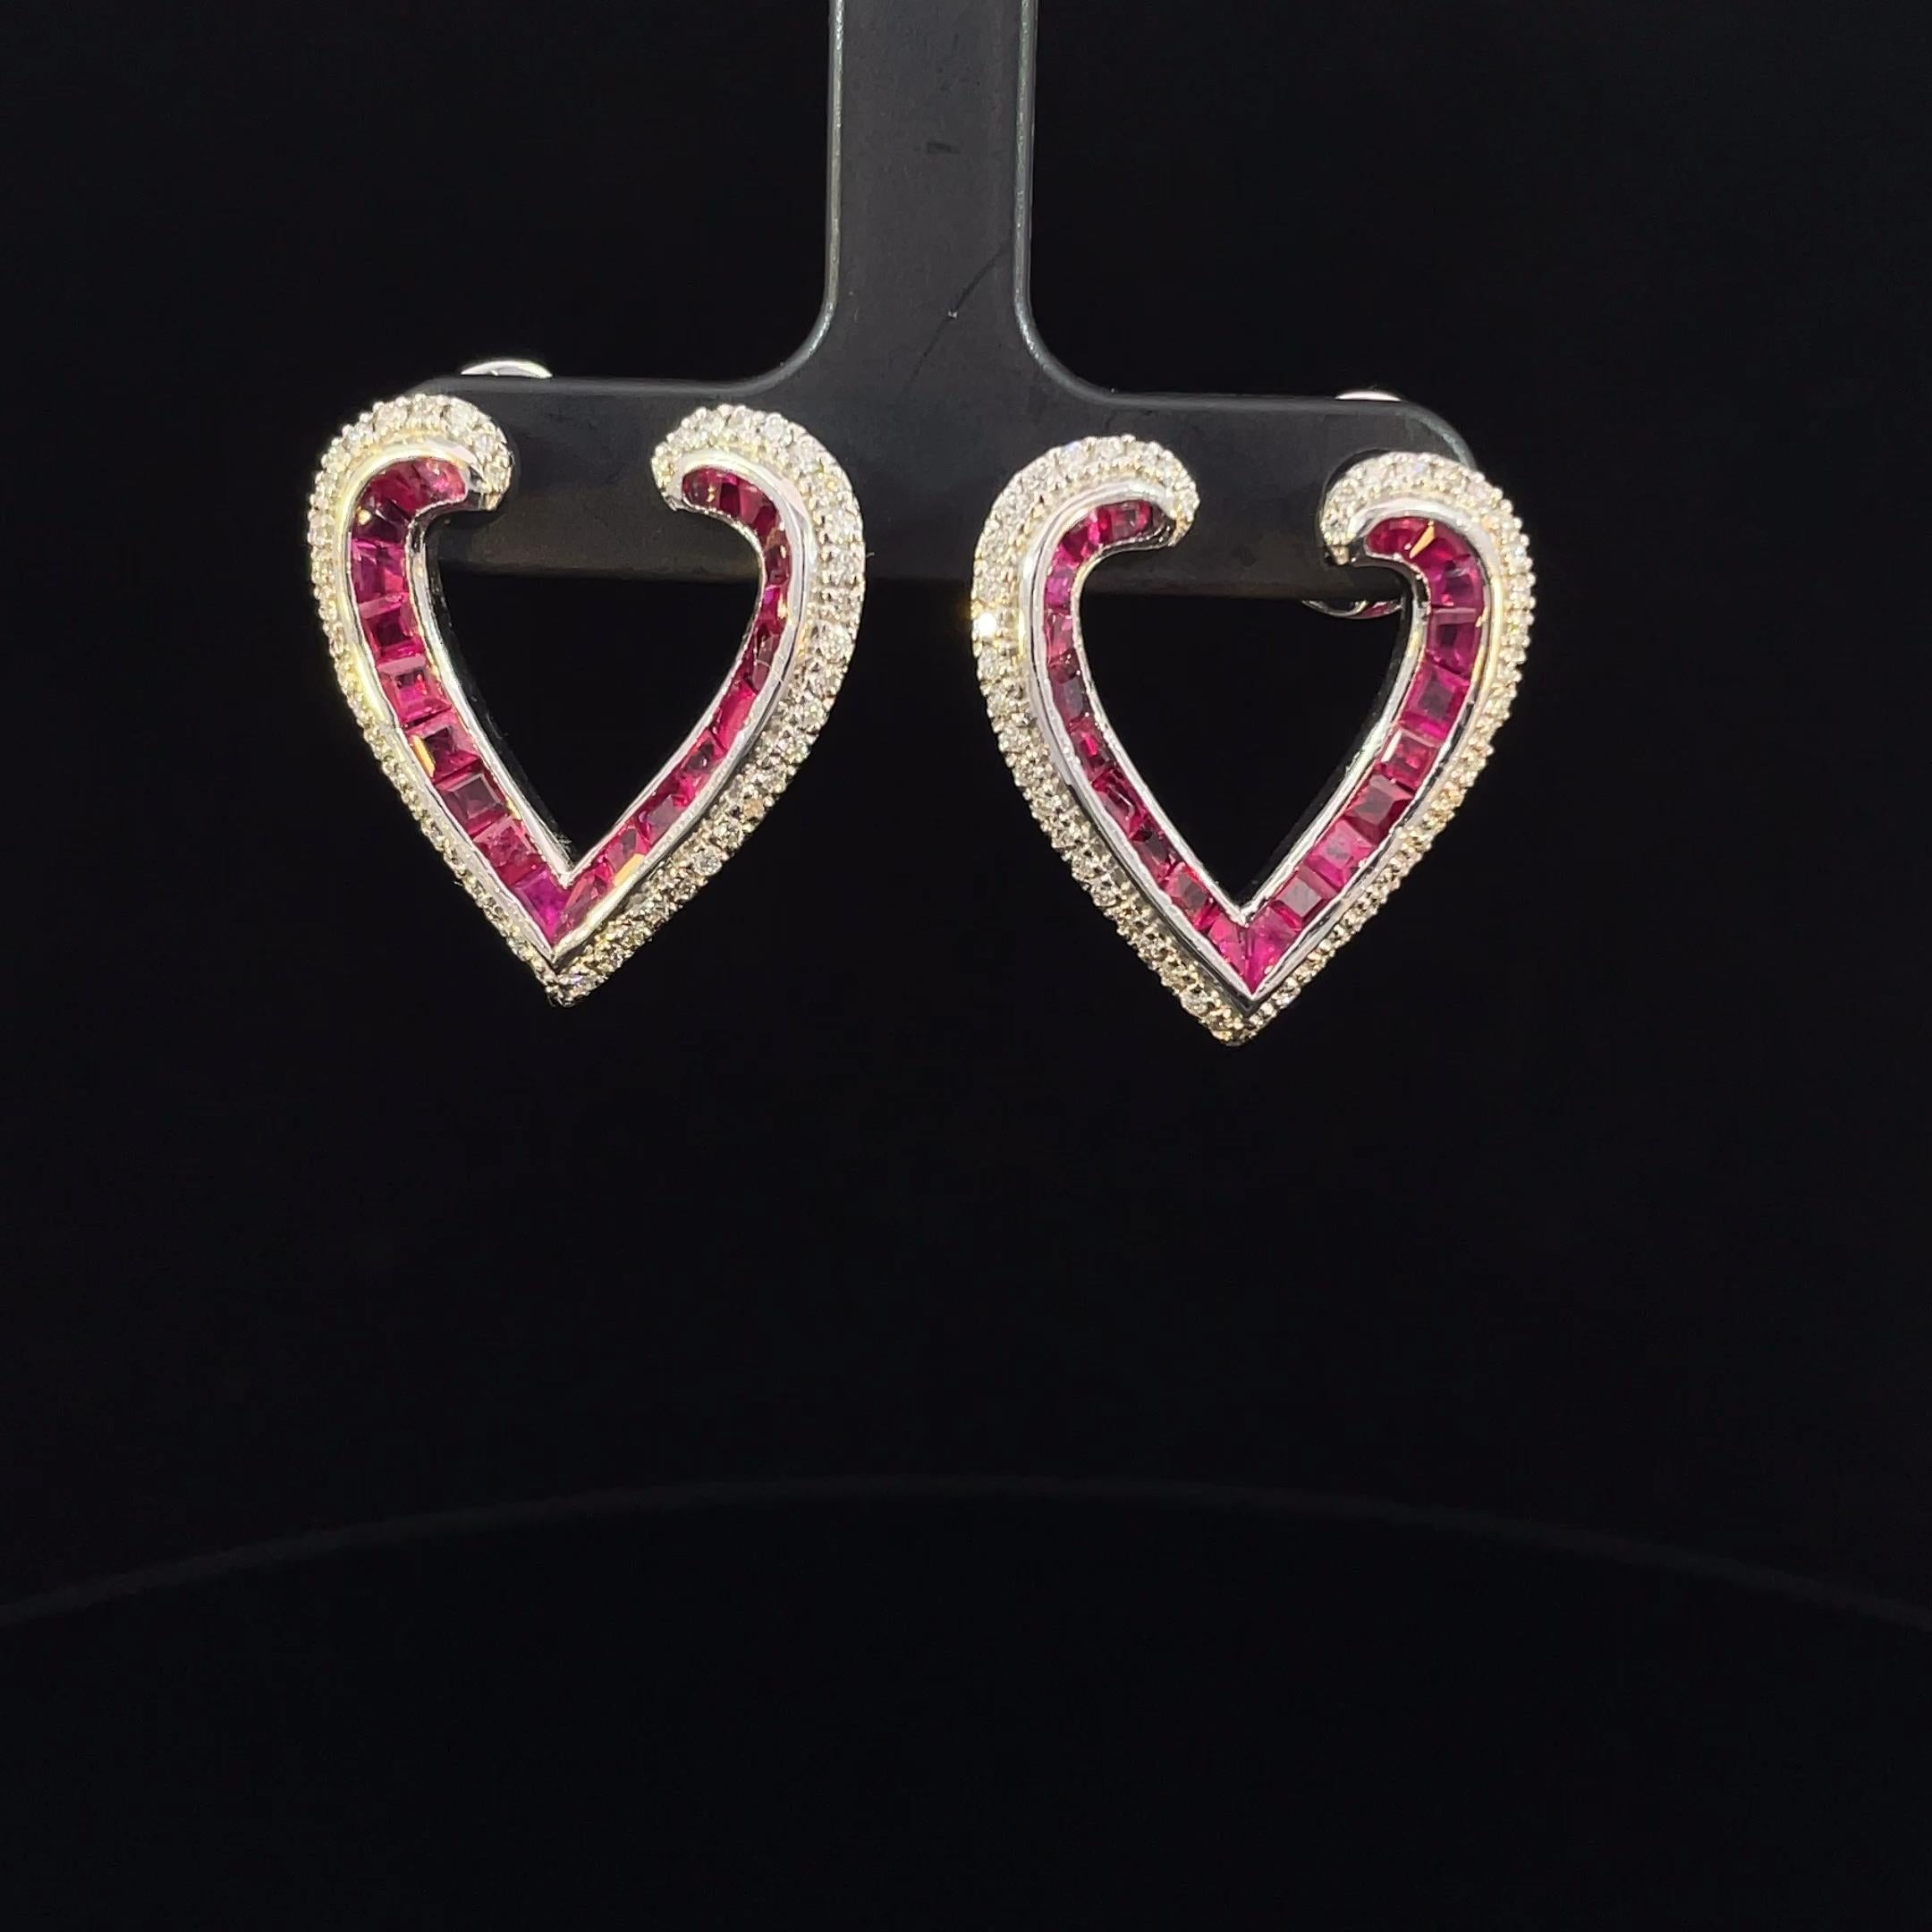 Ignite the flame of passion with our Ruby and Diamond Heart Shaped Studs, a symbol of love and elegance. Each stud features radiant Rubies weighing 1.4 carats, surrounded by sparkling Diamonds with a total carat weight of 0.71.

The heart-shaped